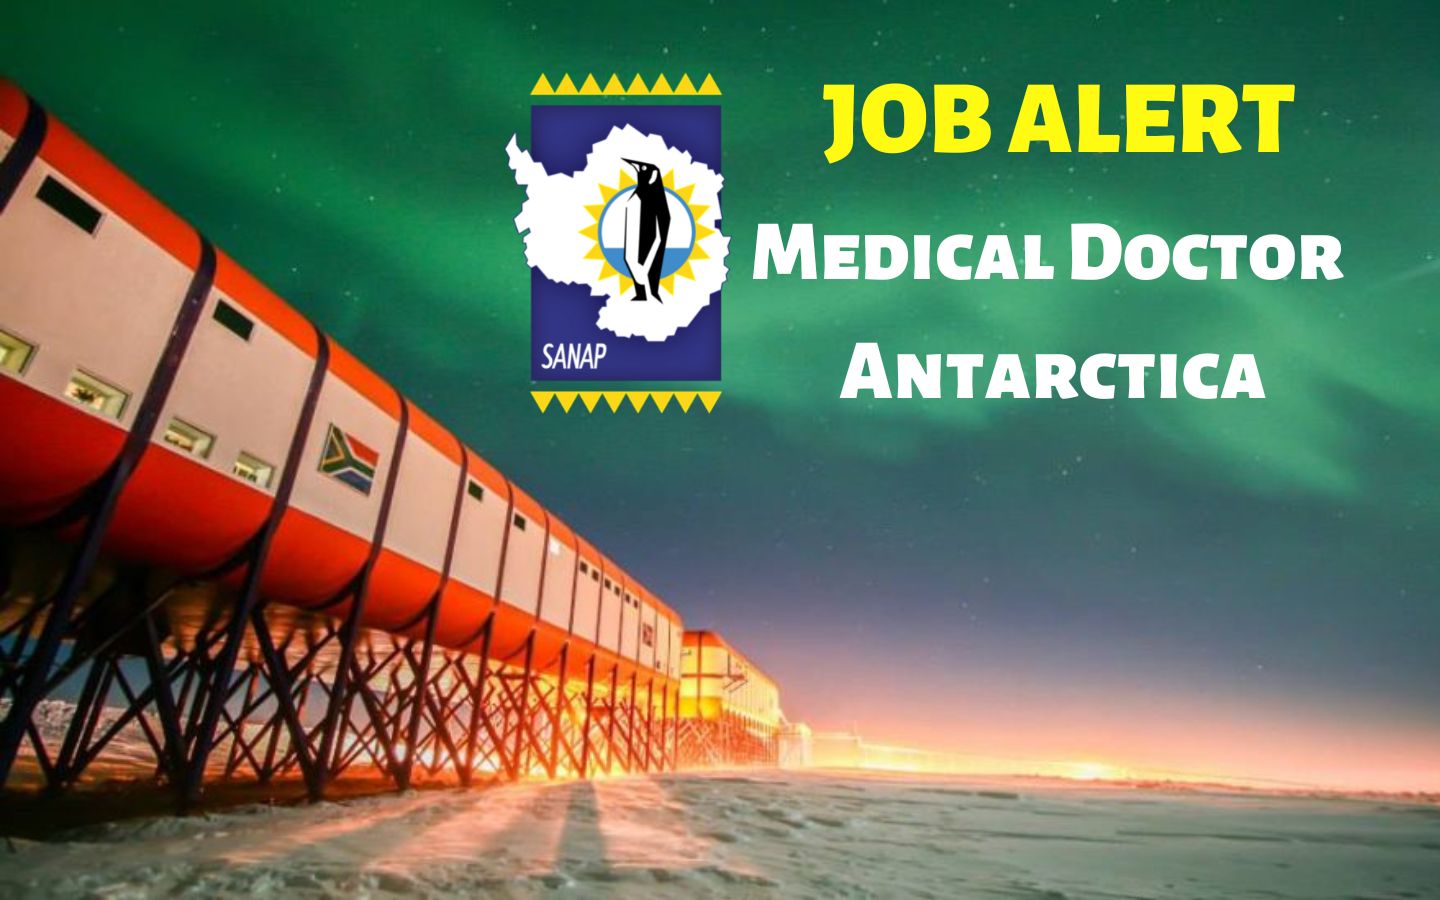 Medical Doctor wanted for Antarctica 2022-2024